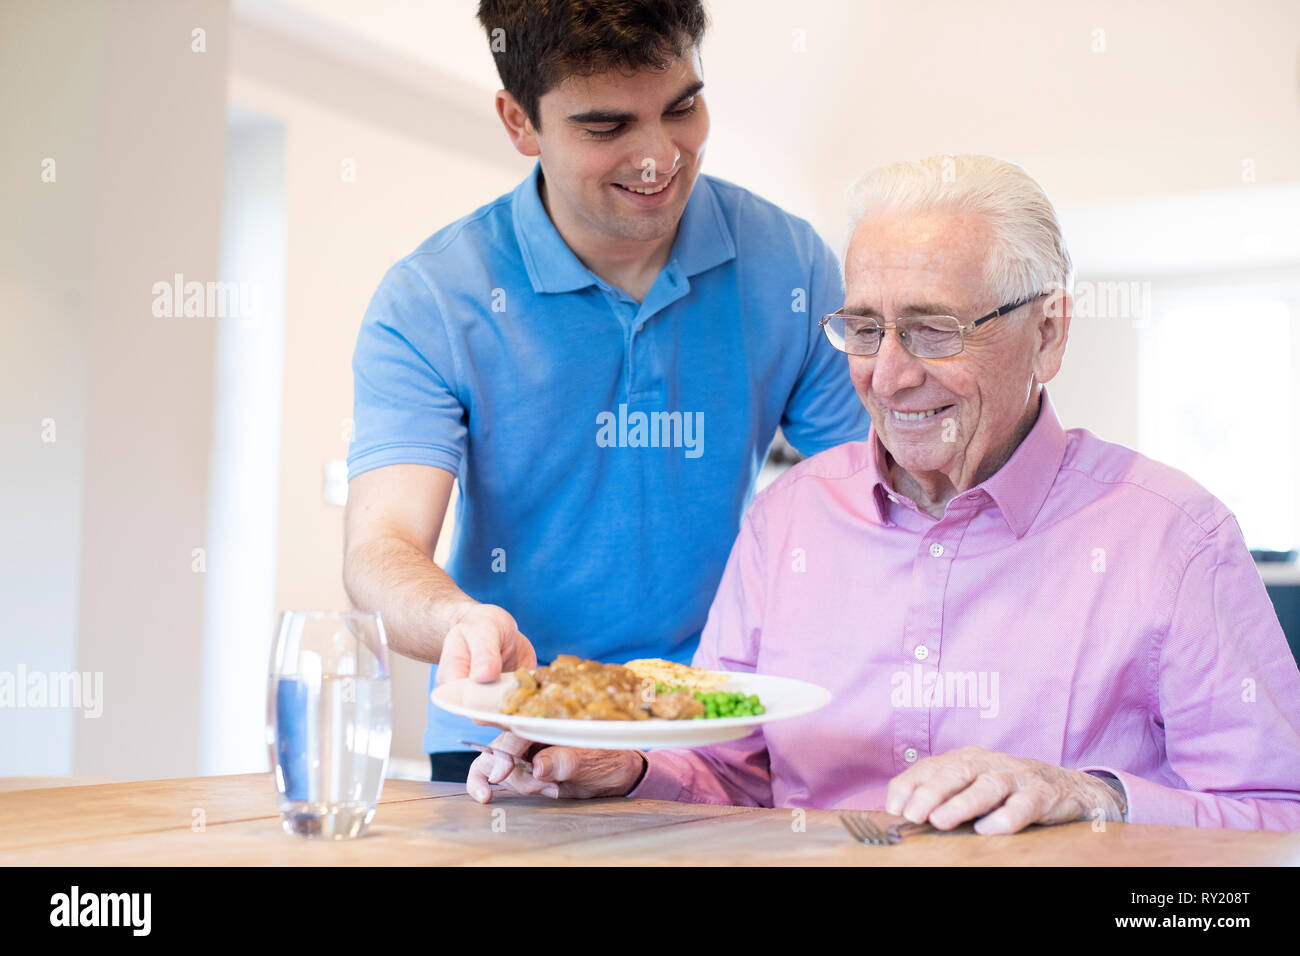 Male Care Assistant Serving Meal To Senior Male Seated At Table Stock Photo